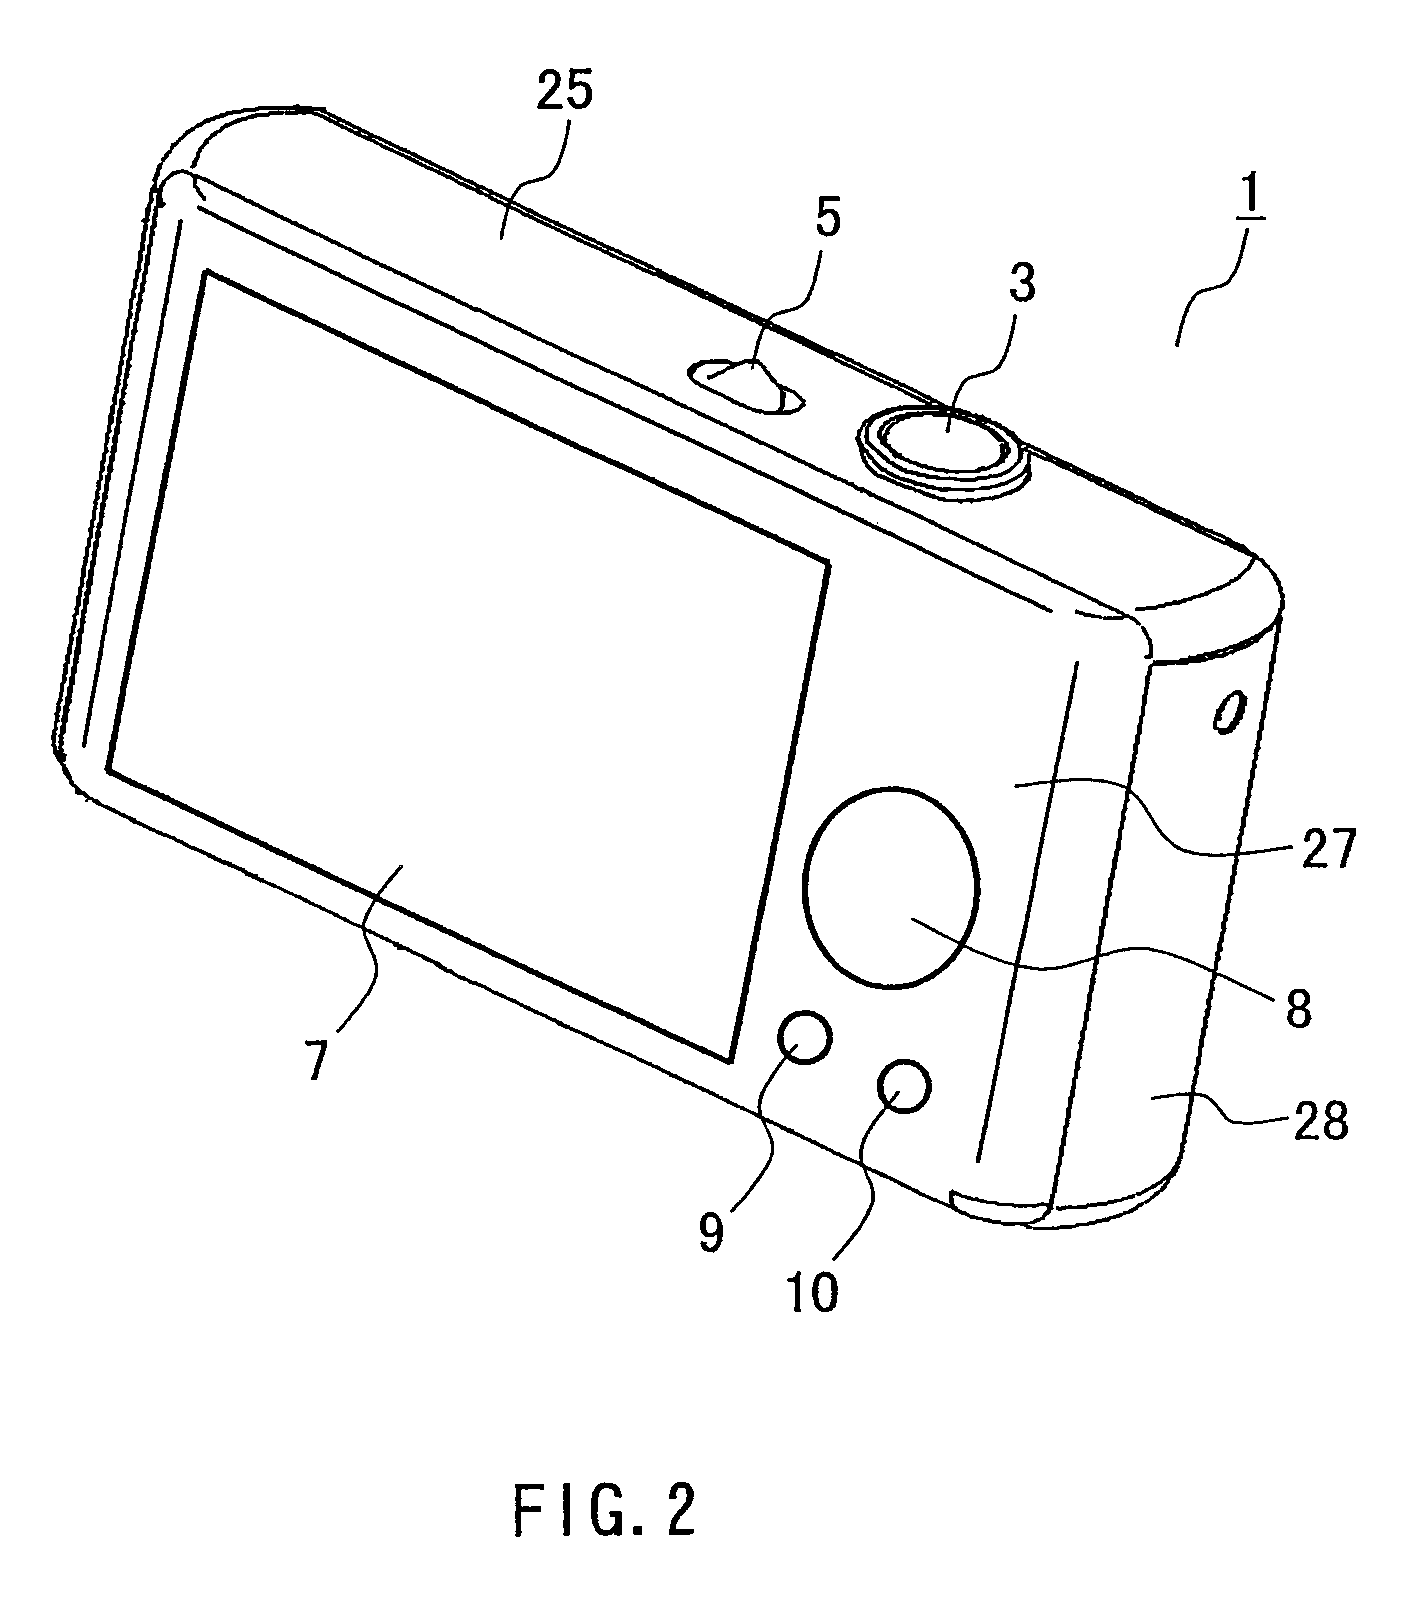 Image pickup apparatus and method of manufacturing thereof